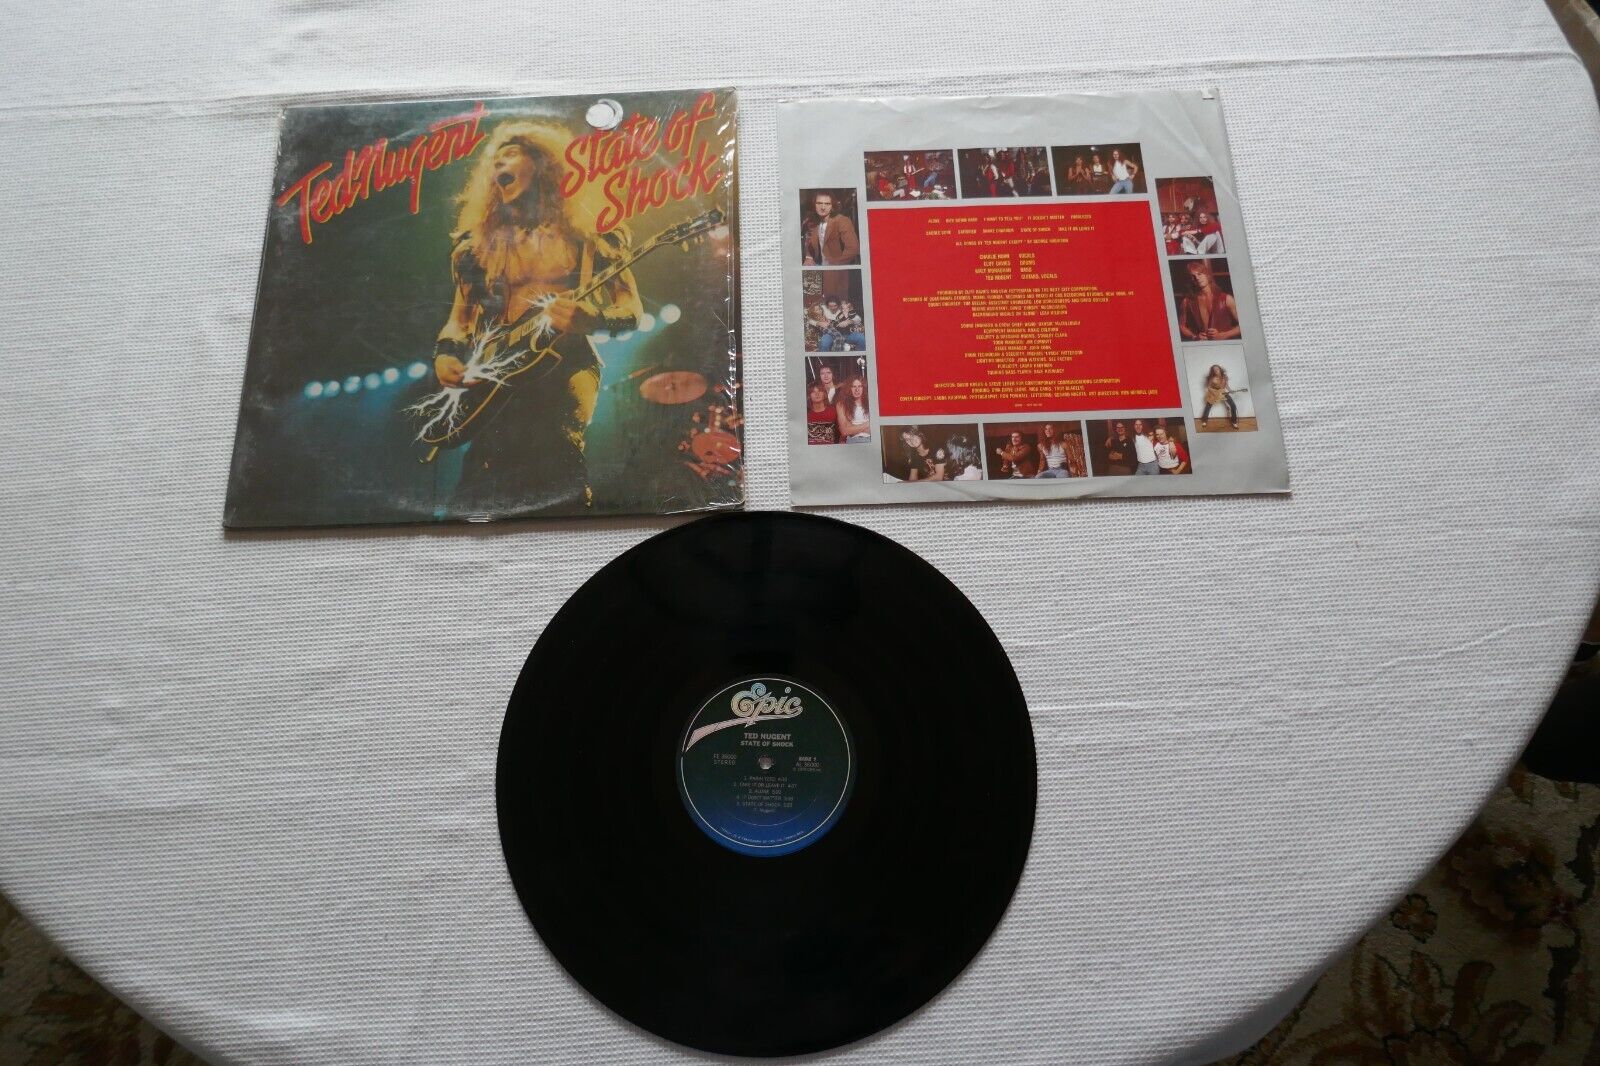 Ted Nugent: State of Shock Vinyl LP, Hard Rock,  RARE, OUT OF PRINT